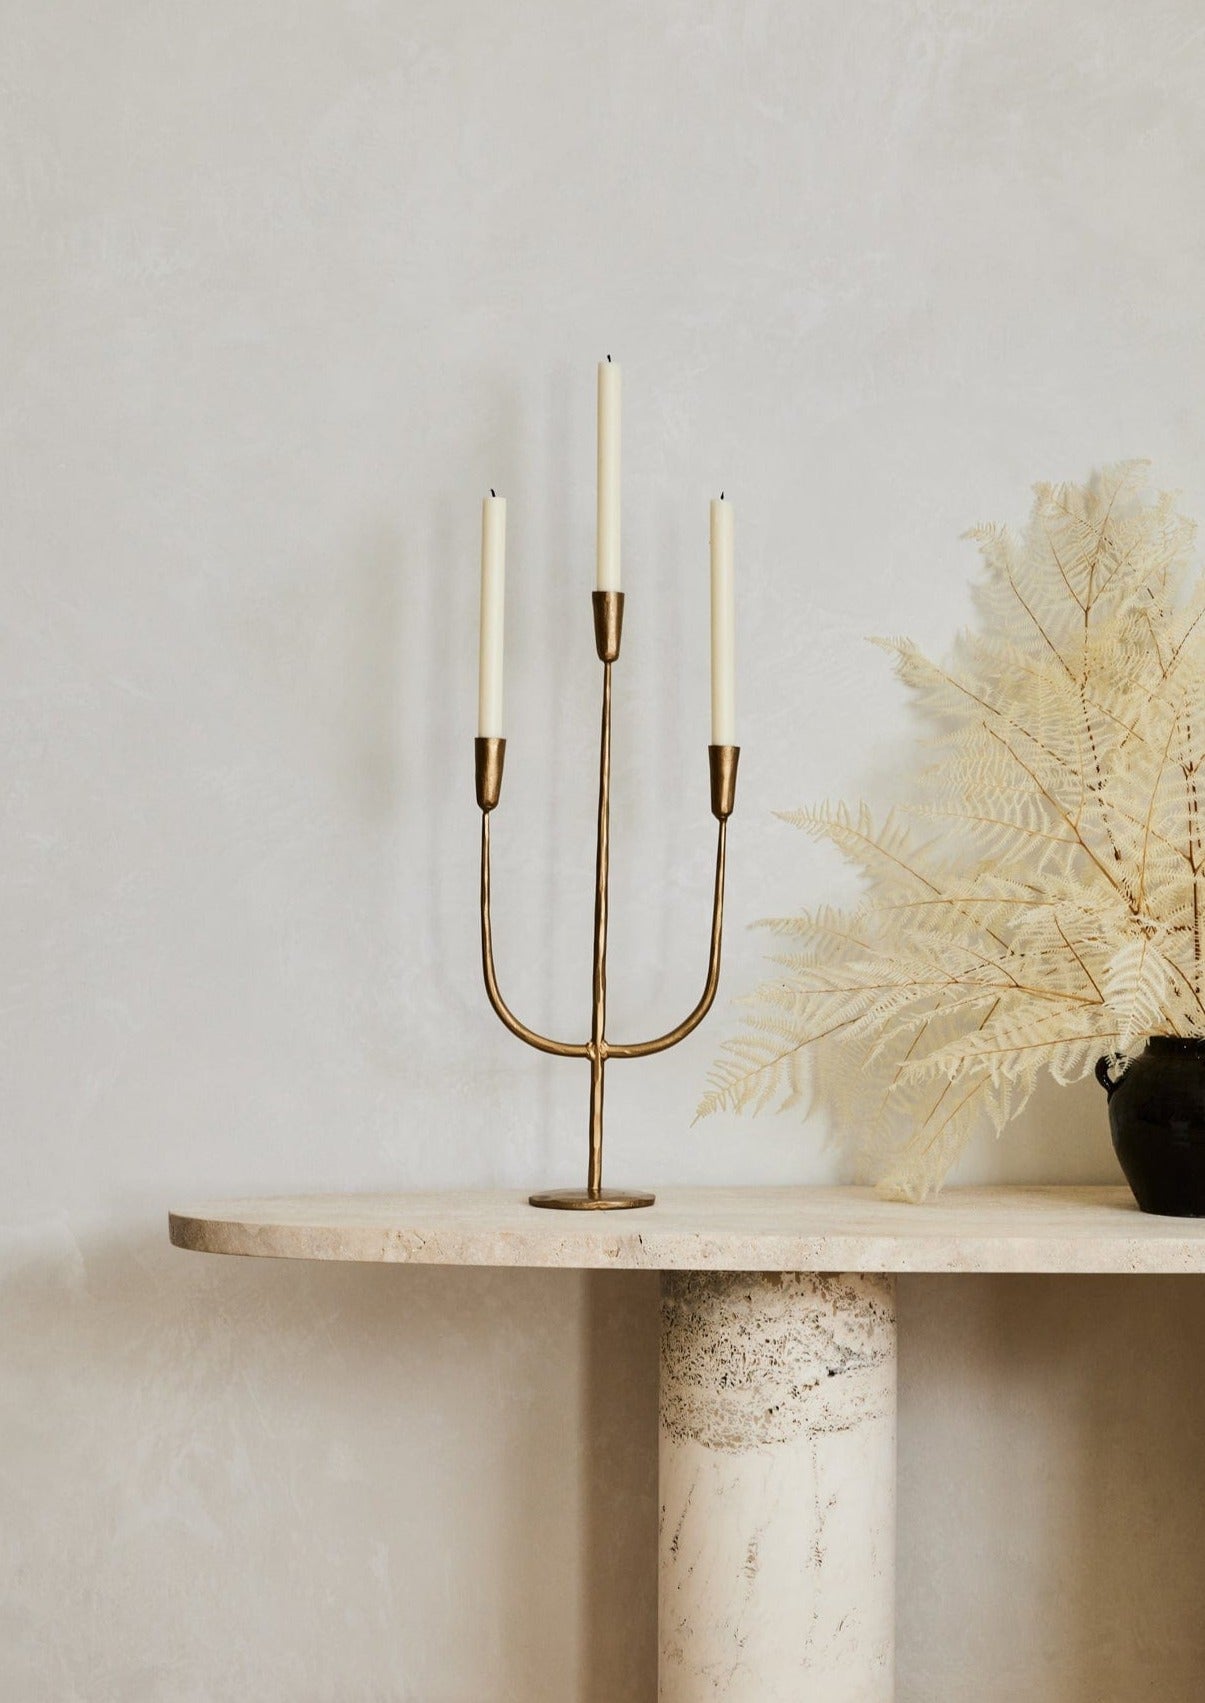 Afloral Gold Candelabra Styled on Table